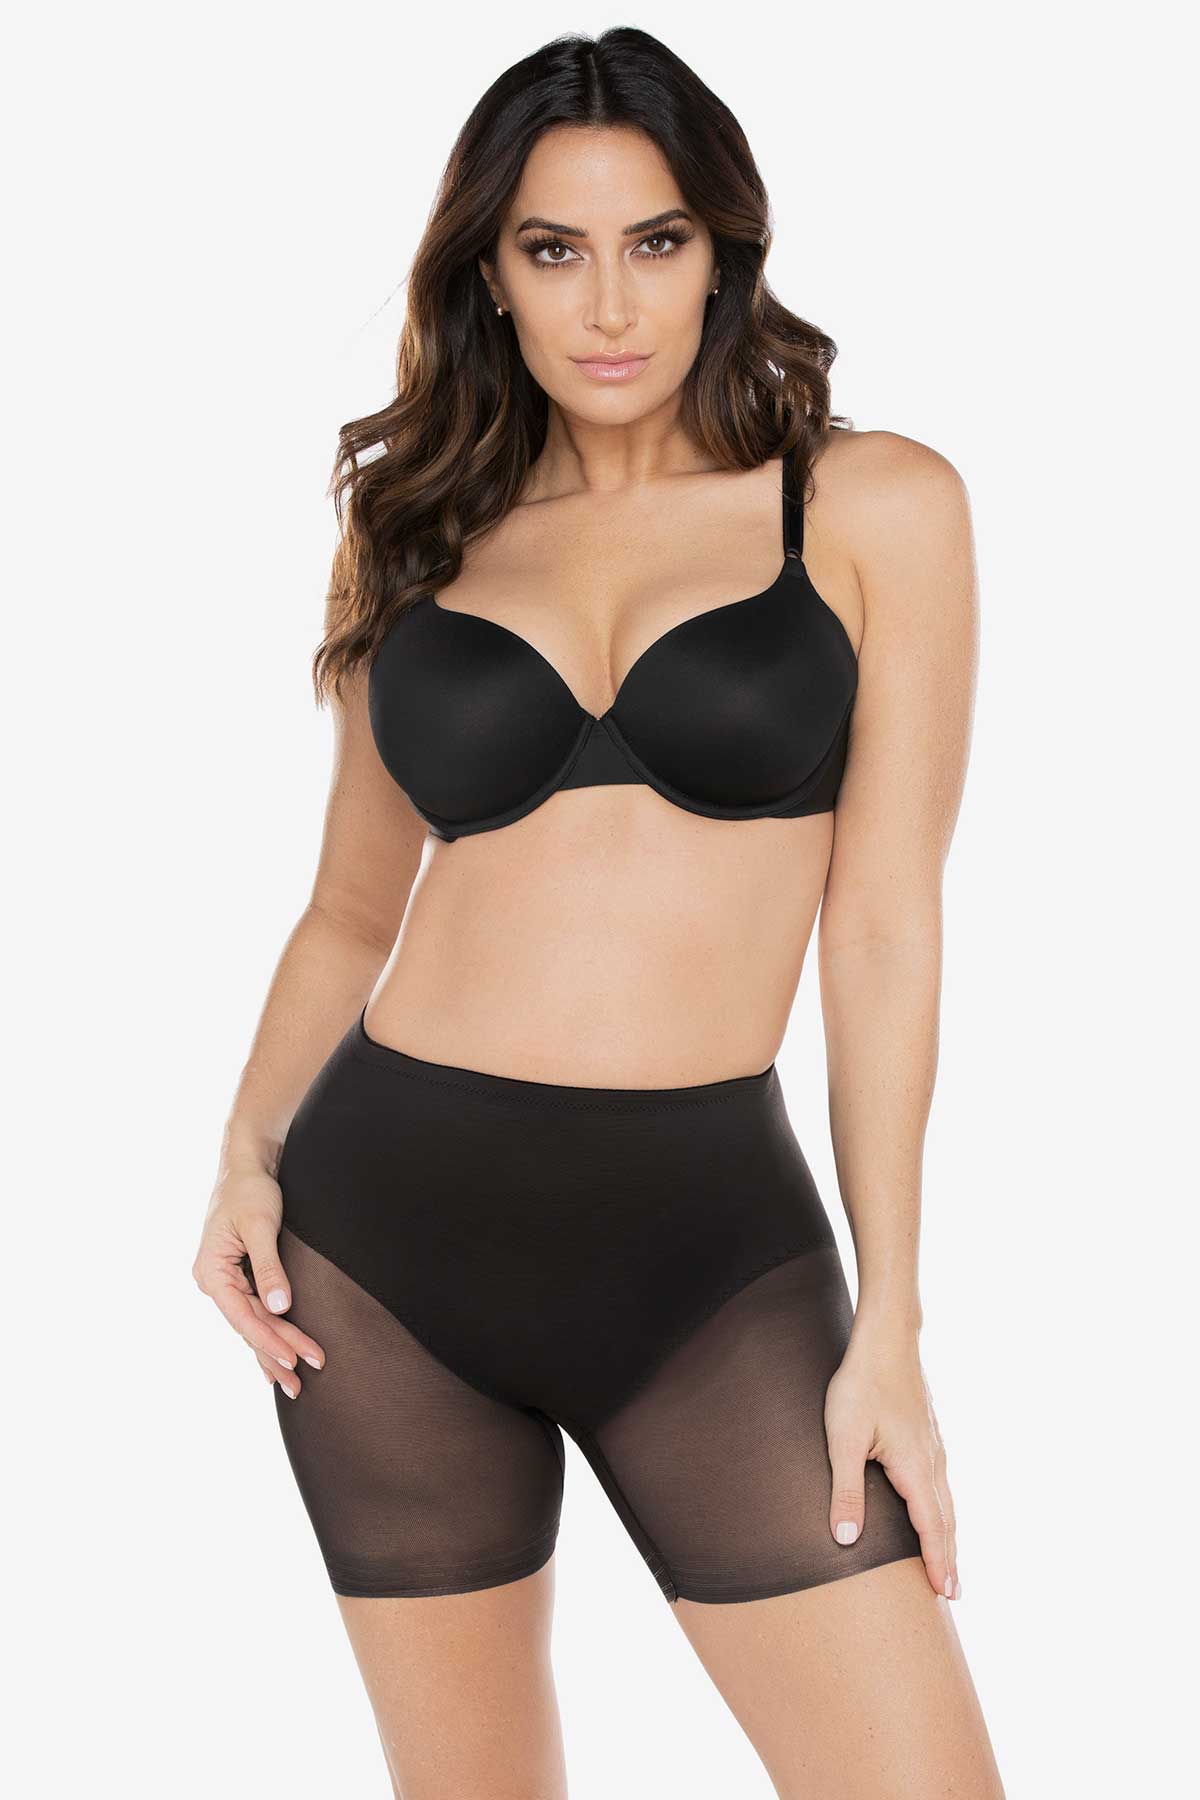 Out From Under Boy Meets Girl Sheer Mesh Bralette